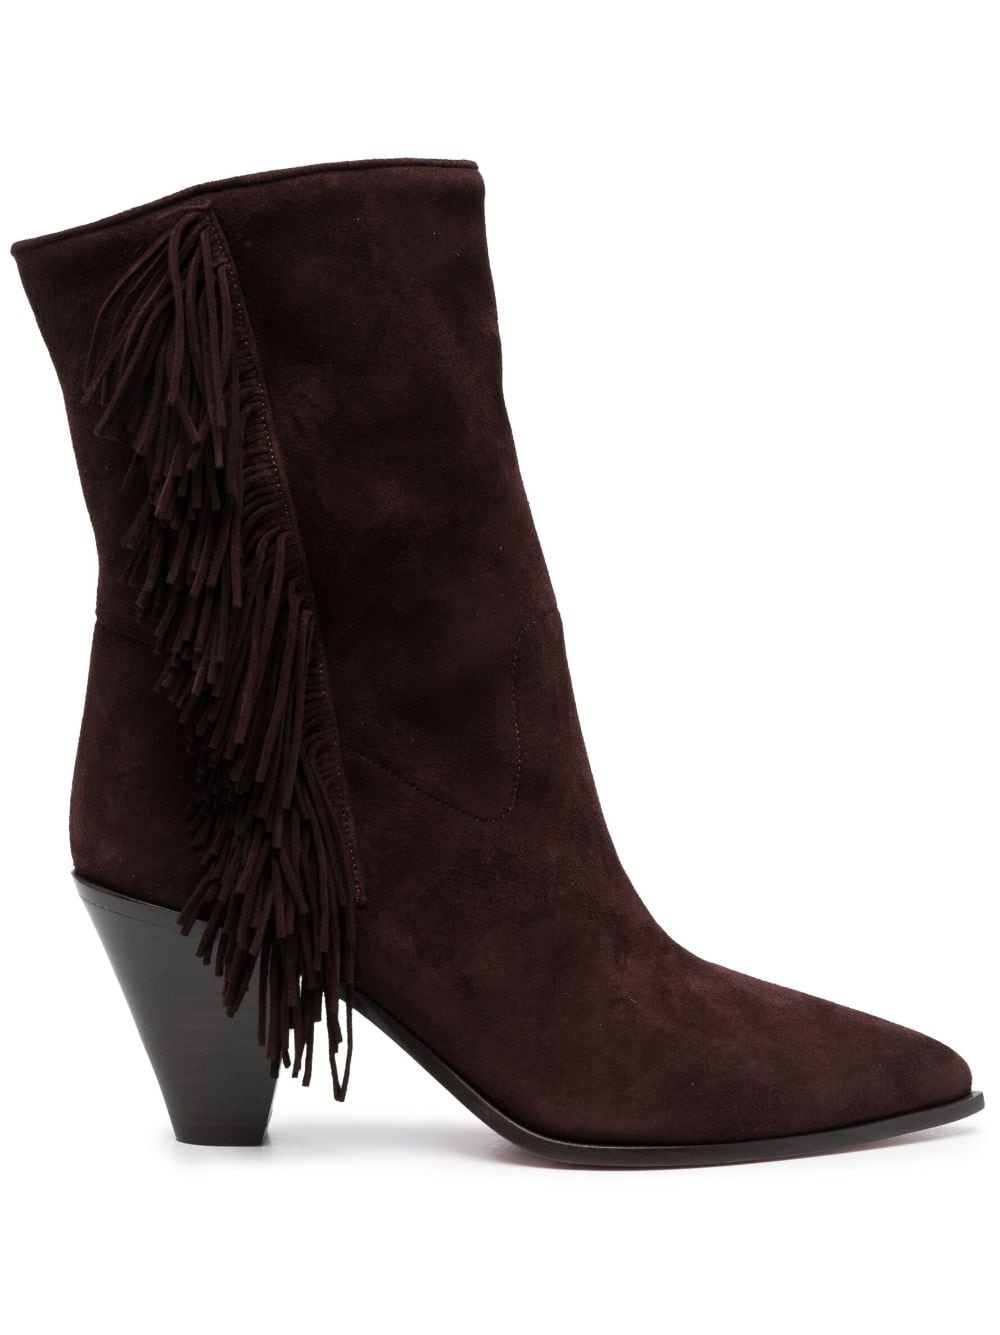 Marfa 70mm fringed suede boots - 1